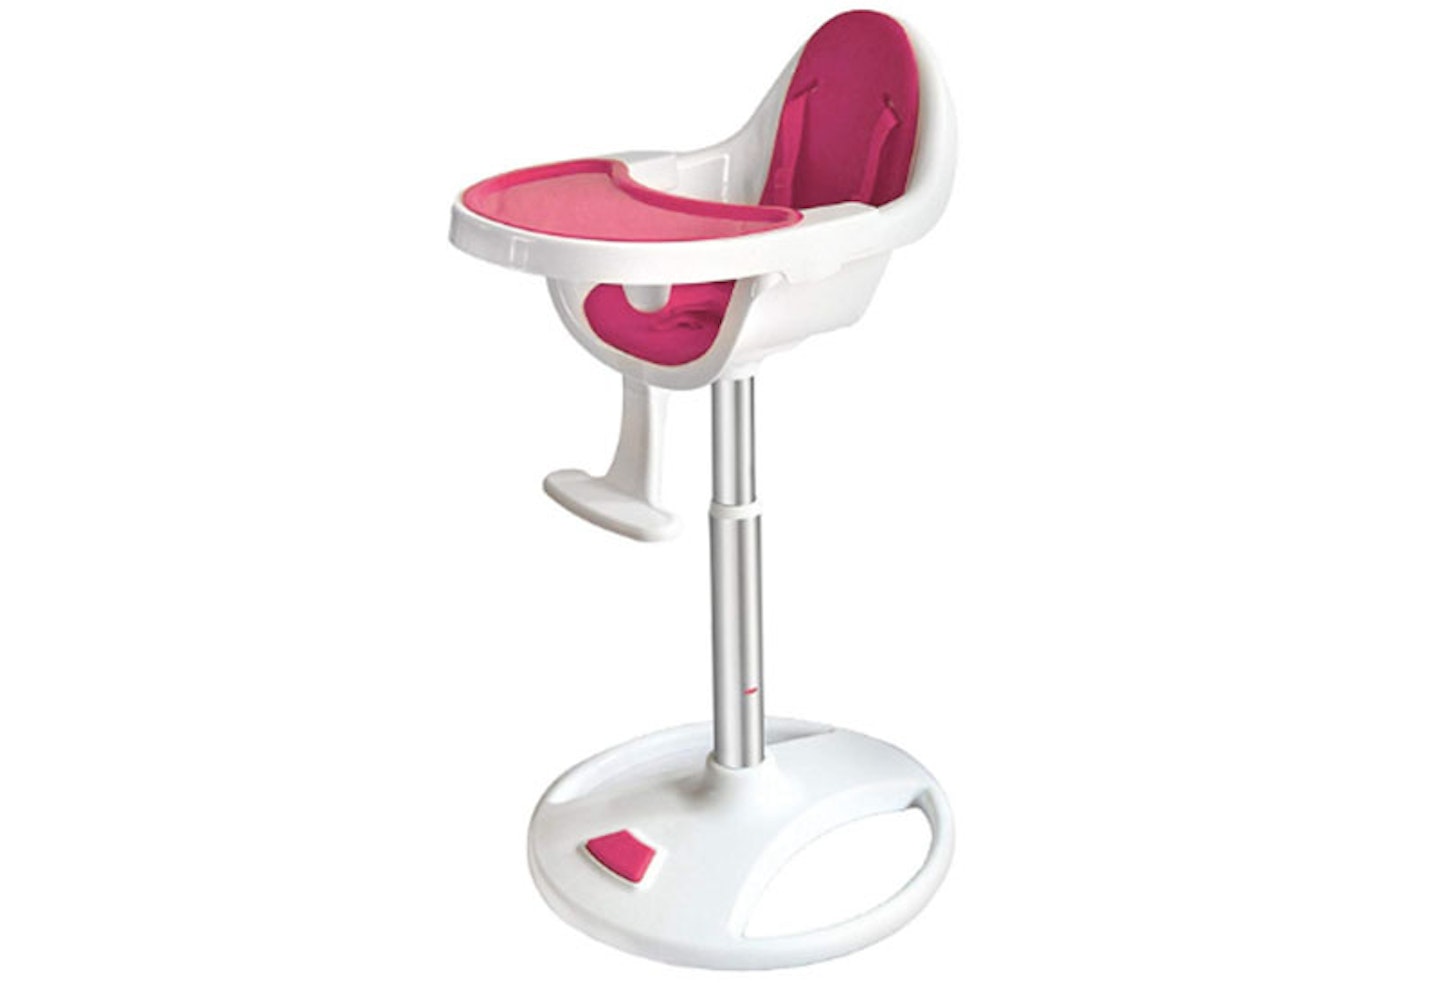 Tidy Tot - Picking a highchair can be a tricky business!